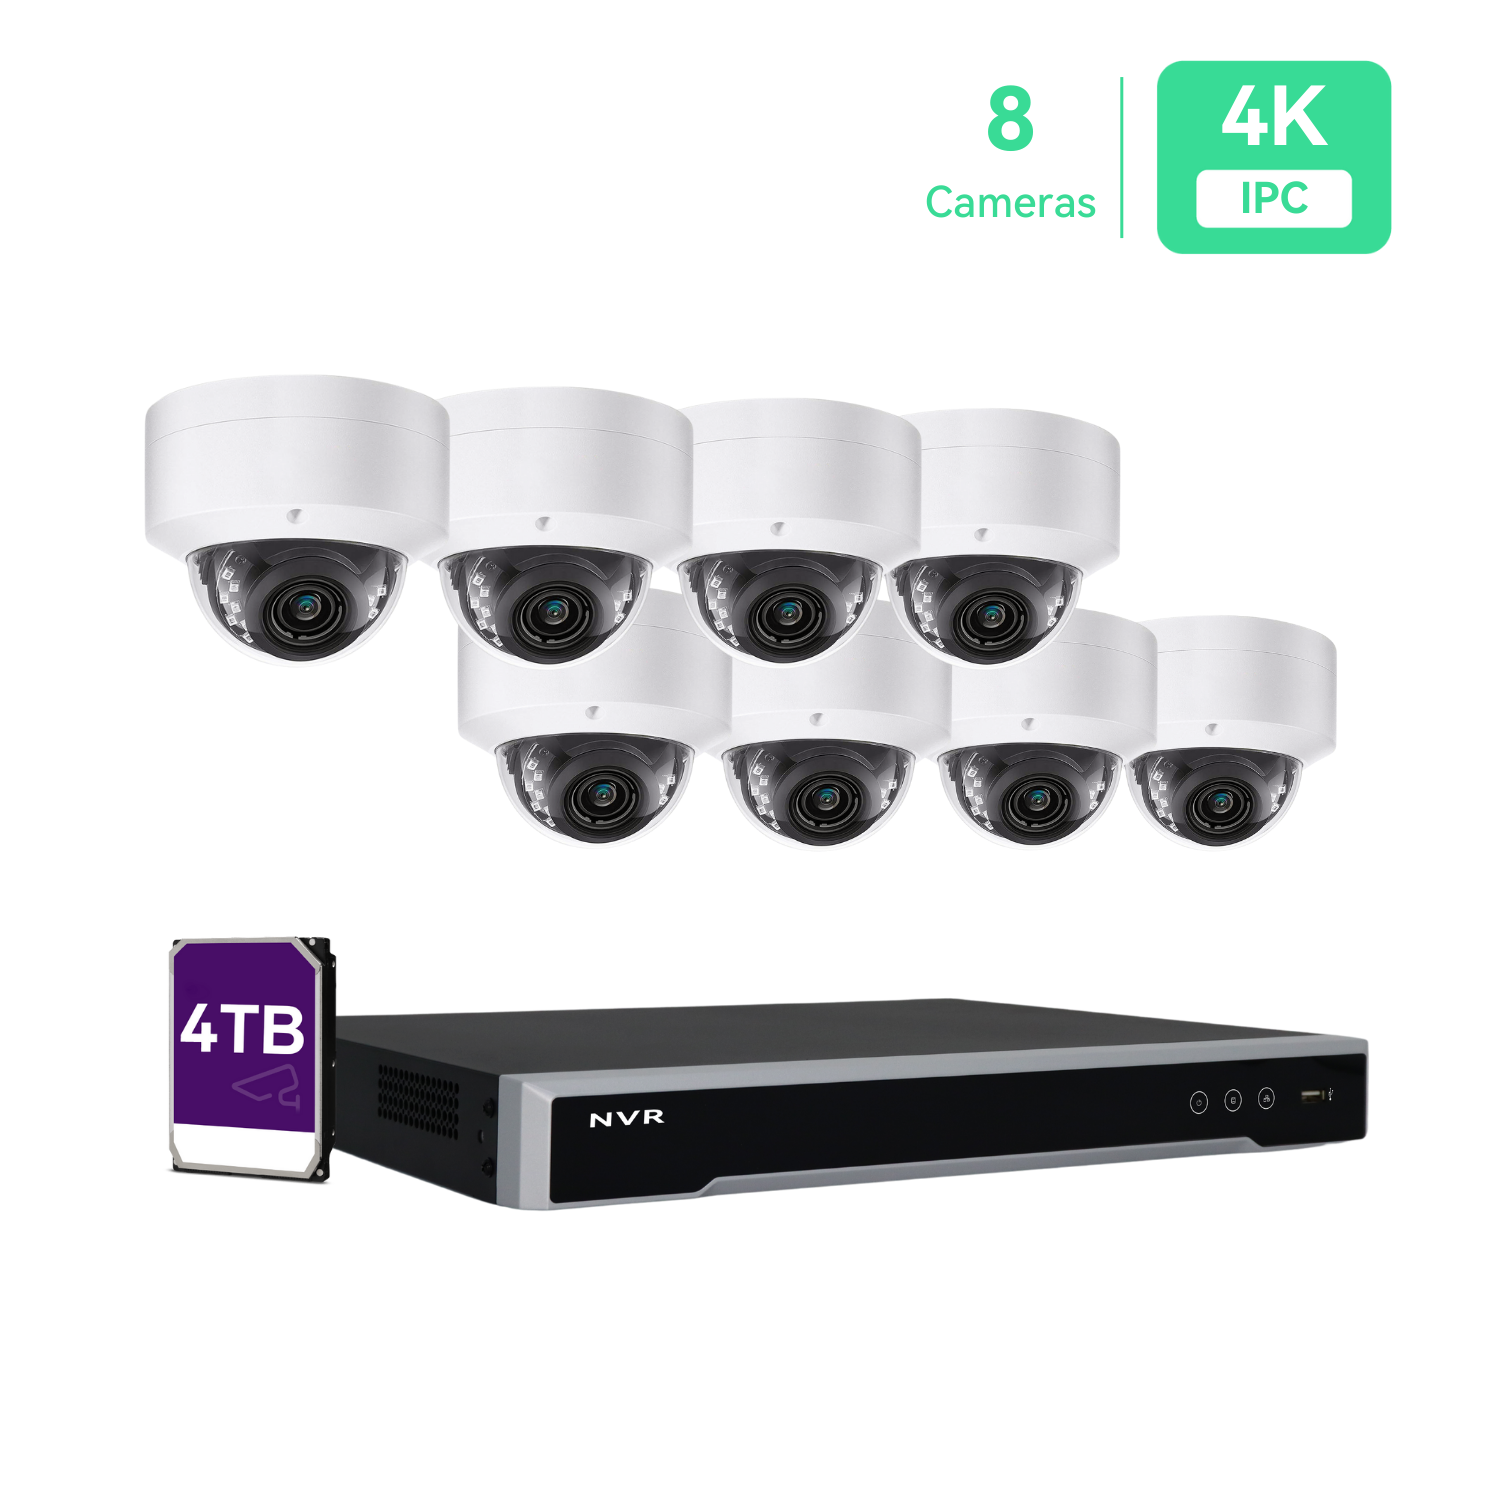 16CH 4K PoE IP Security Camera System with 8*4K Dome Cameras, 4TB HDD